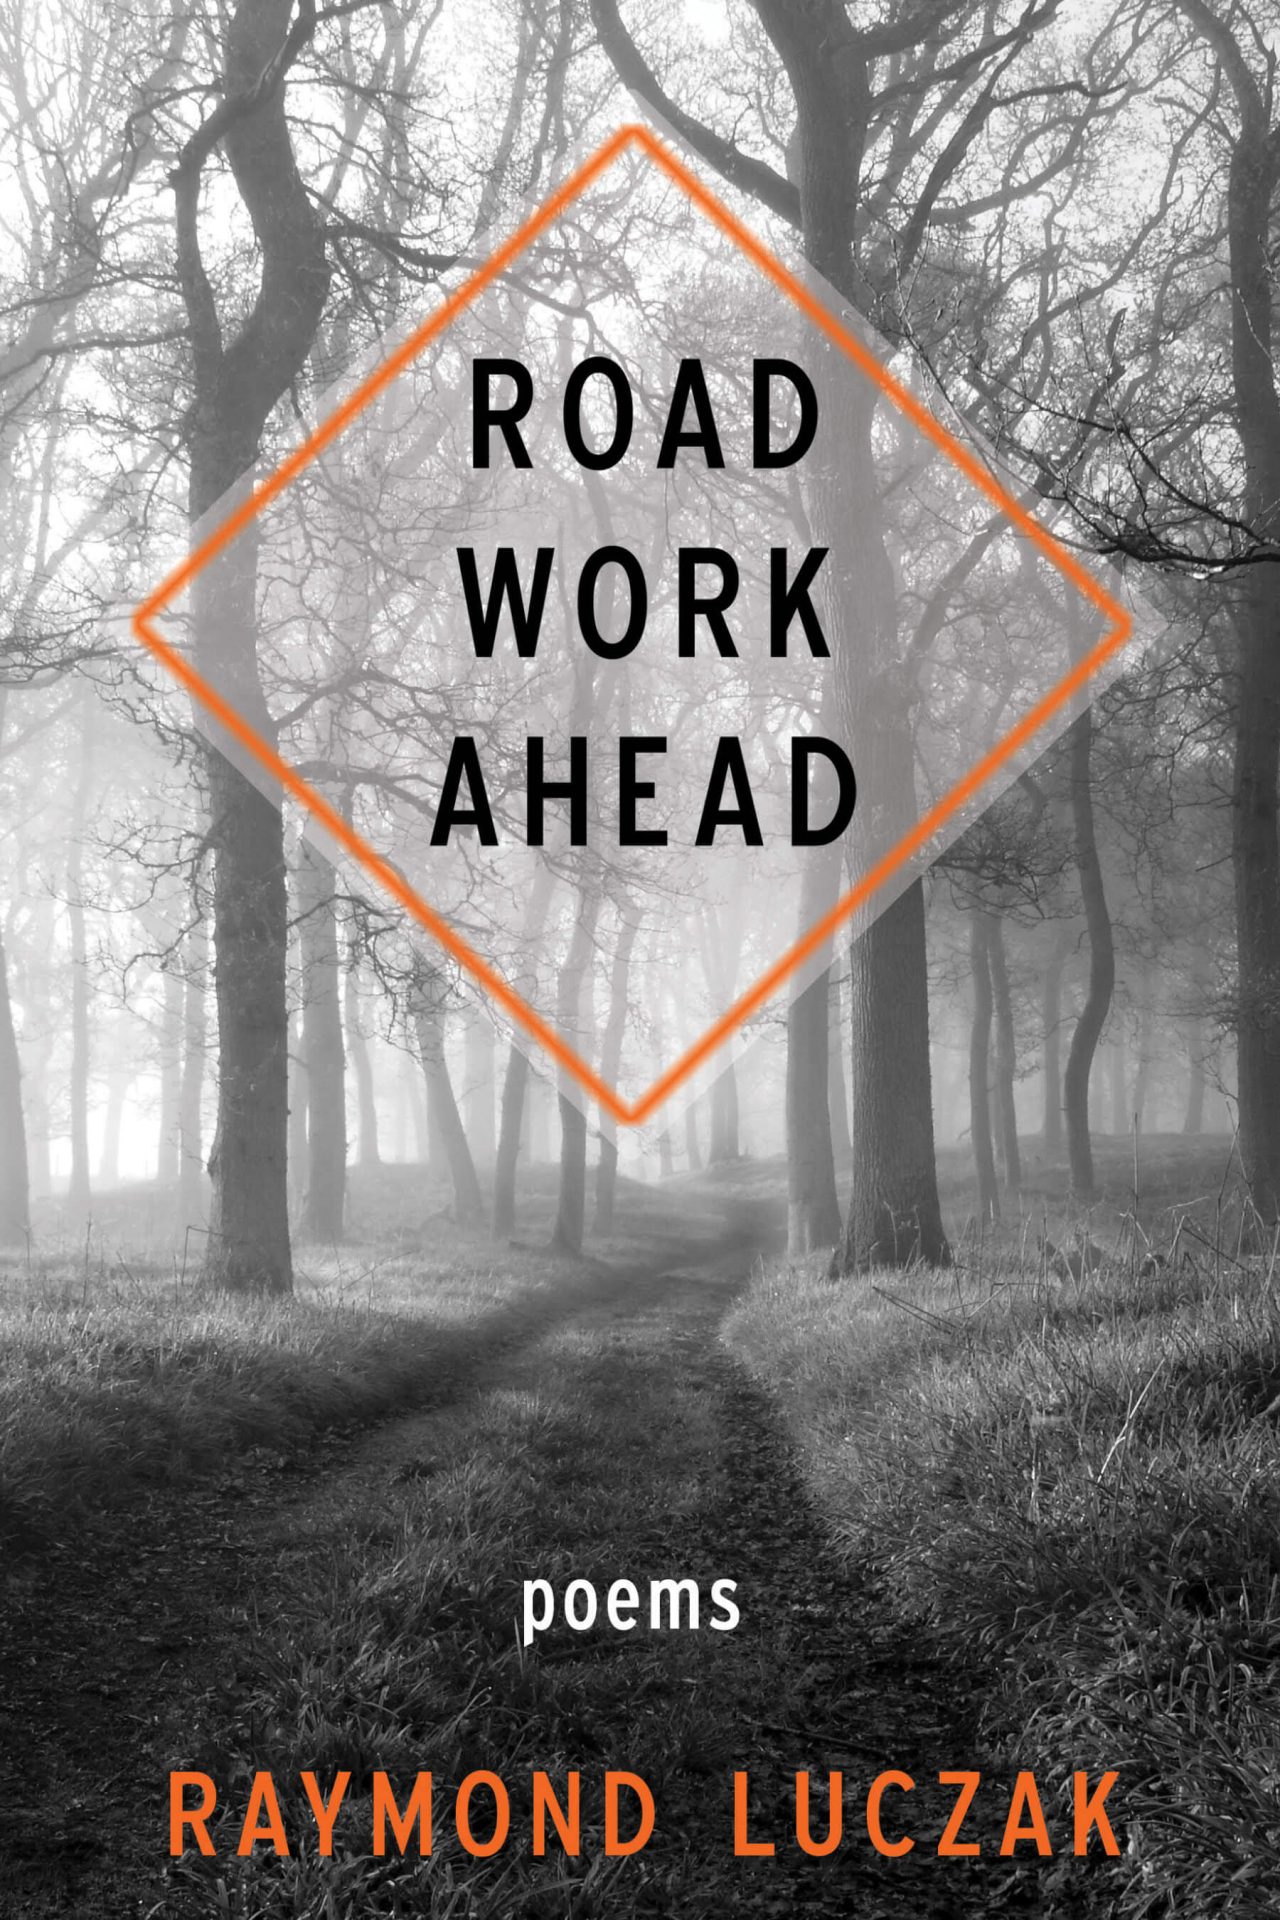 The black-and-white photograph shows a grassy road through a sparse forest. Above the road is a transparent square with a bright orange border tilted to the side. The text on top of the square says ROAD WORK AHEAD. Below the "sign" are the text in white and orange: poems | RAYMOND LUCZAK.